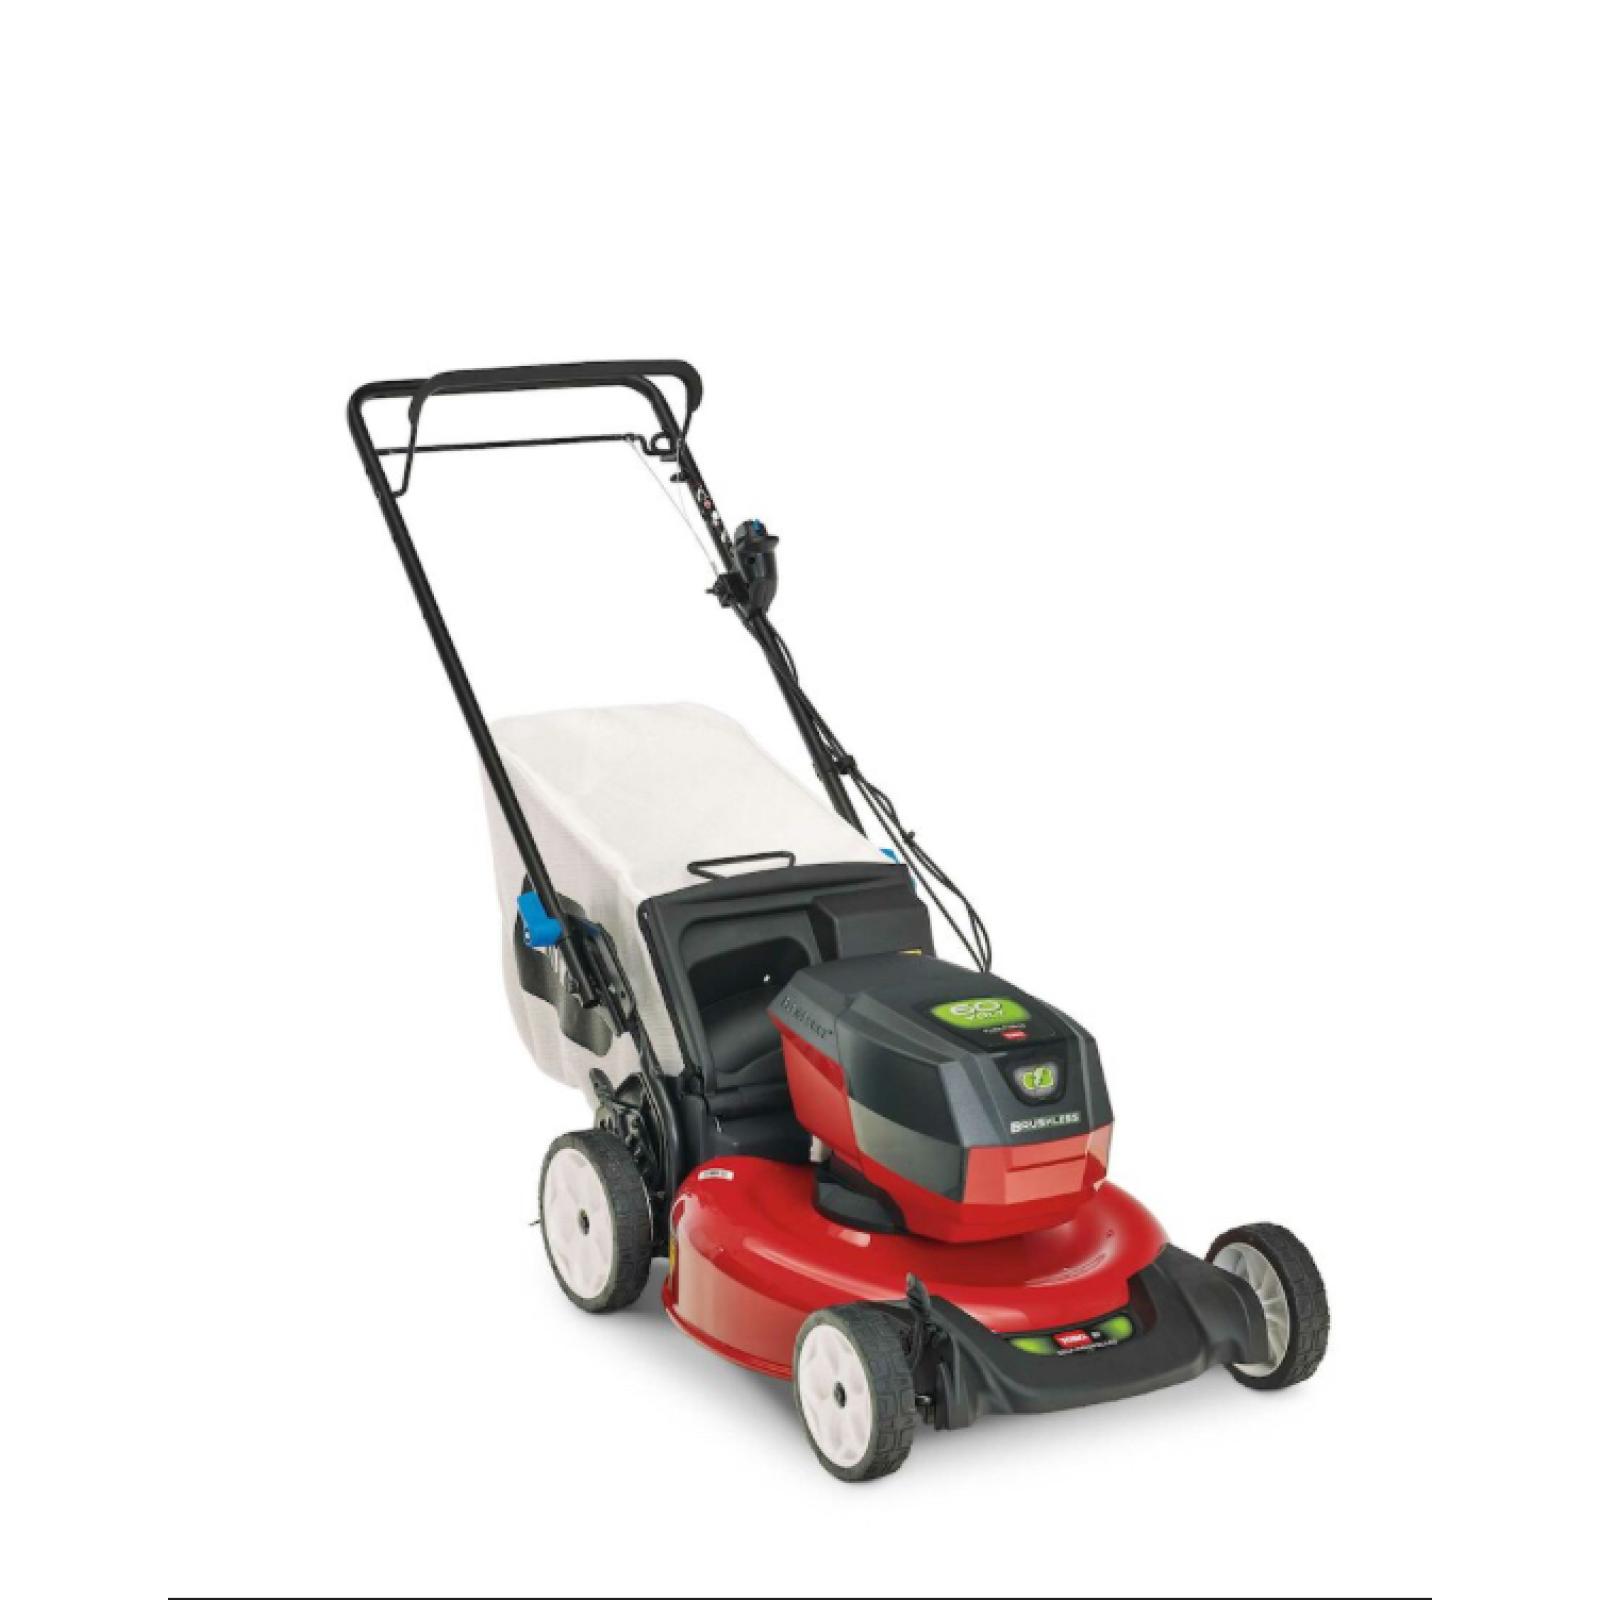 DALLAS LOCATION - NEW! TORO 60V Max* 21 in. (53cm) Recycler® Self-Propel w/SmartStow® Lawn Mower with 5.0Ah Battery PALLET